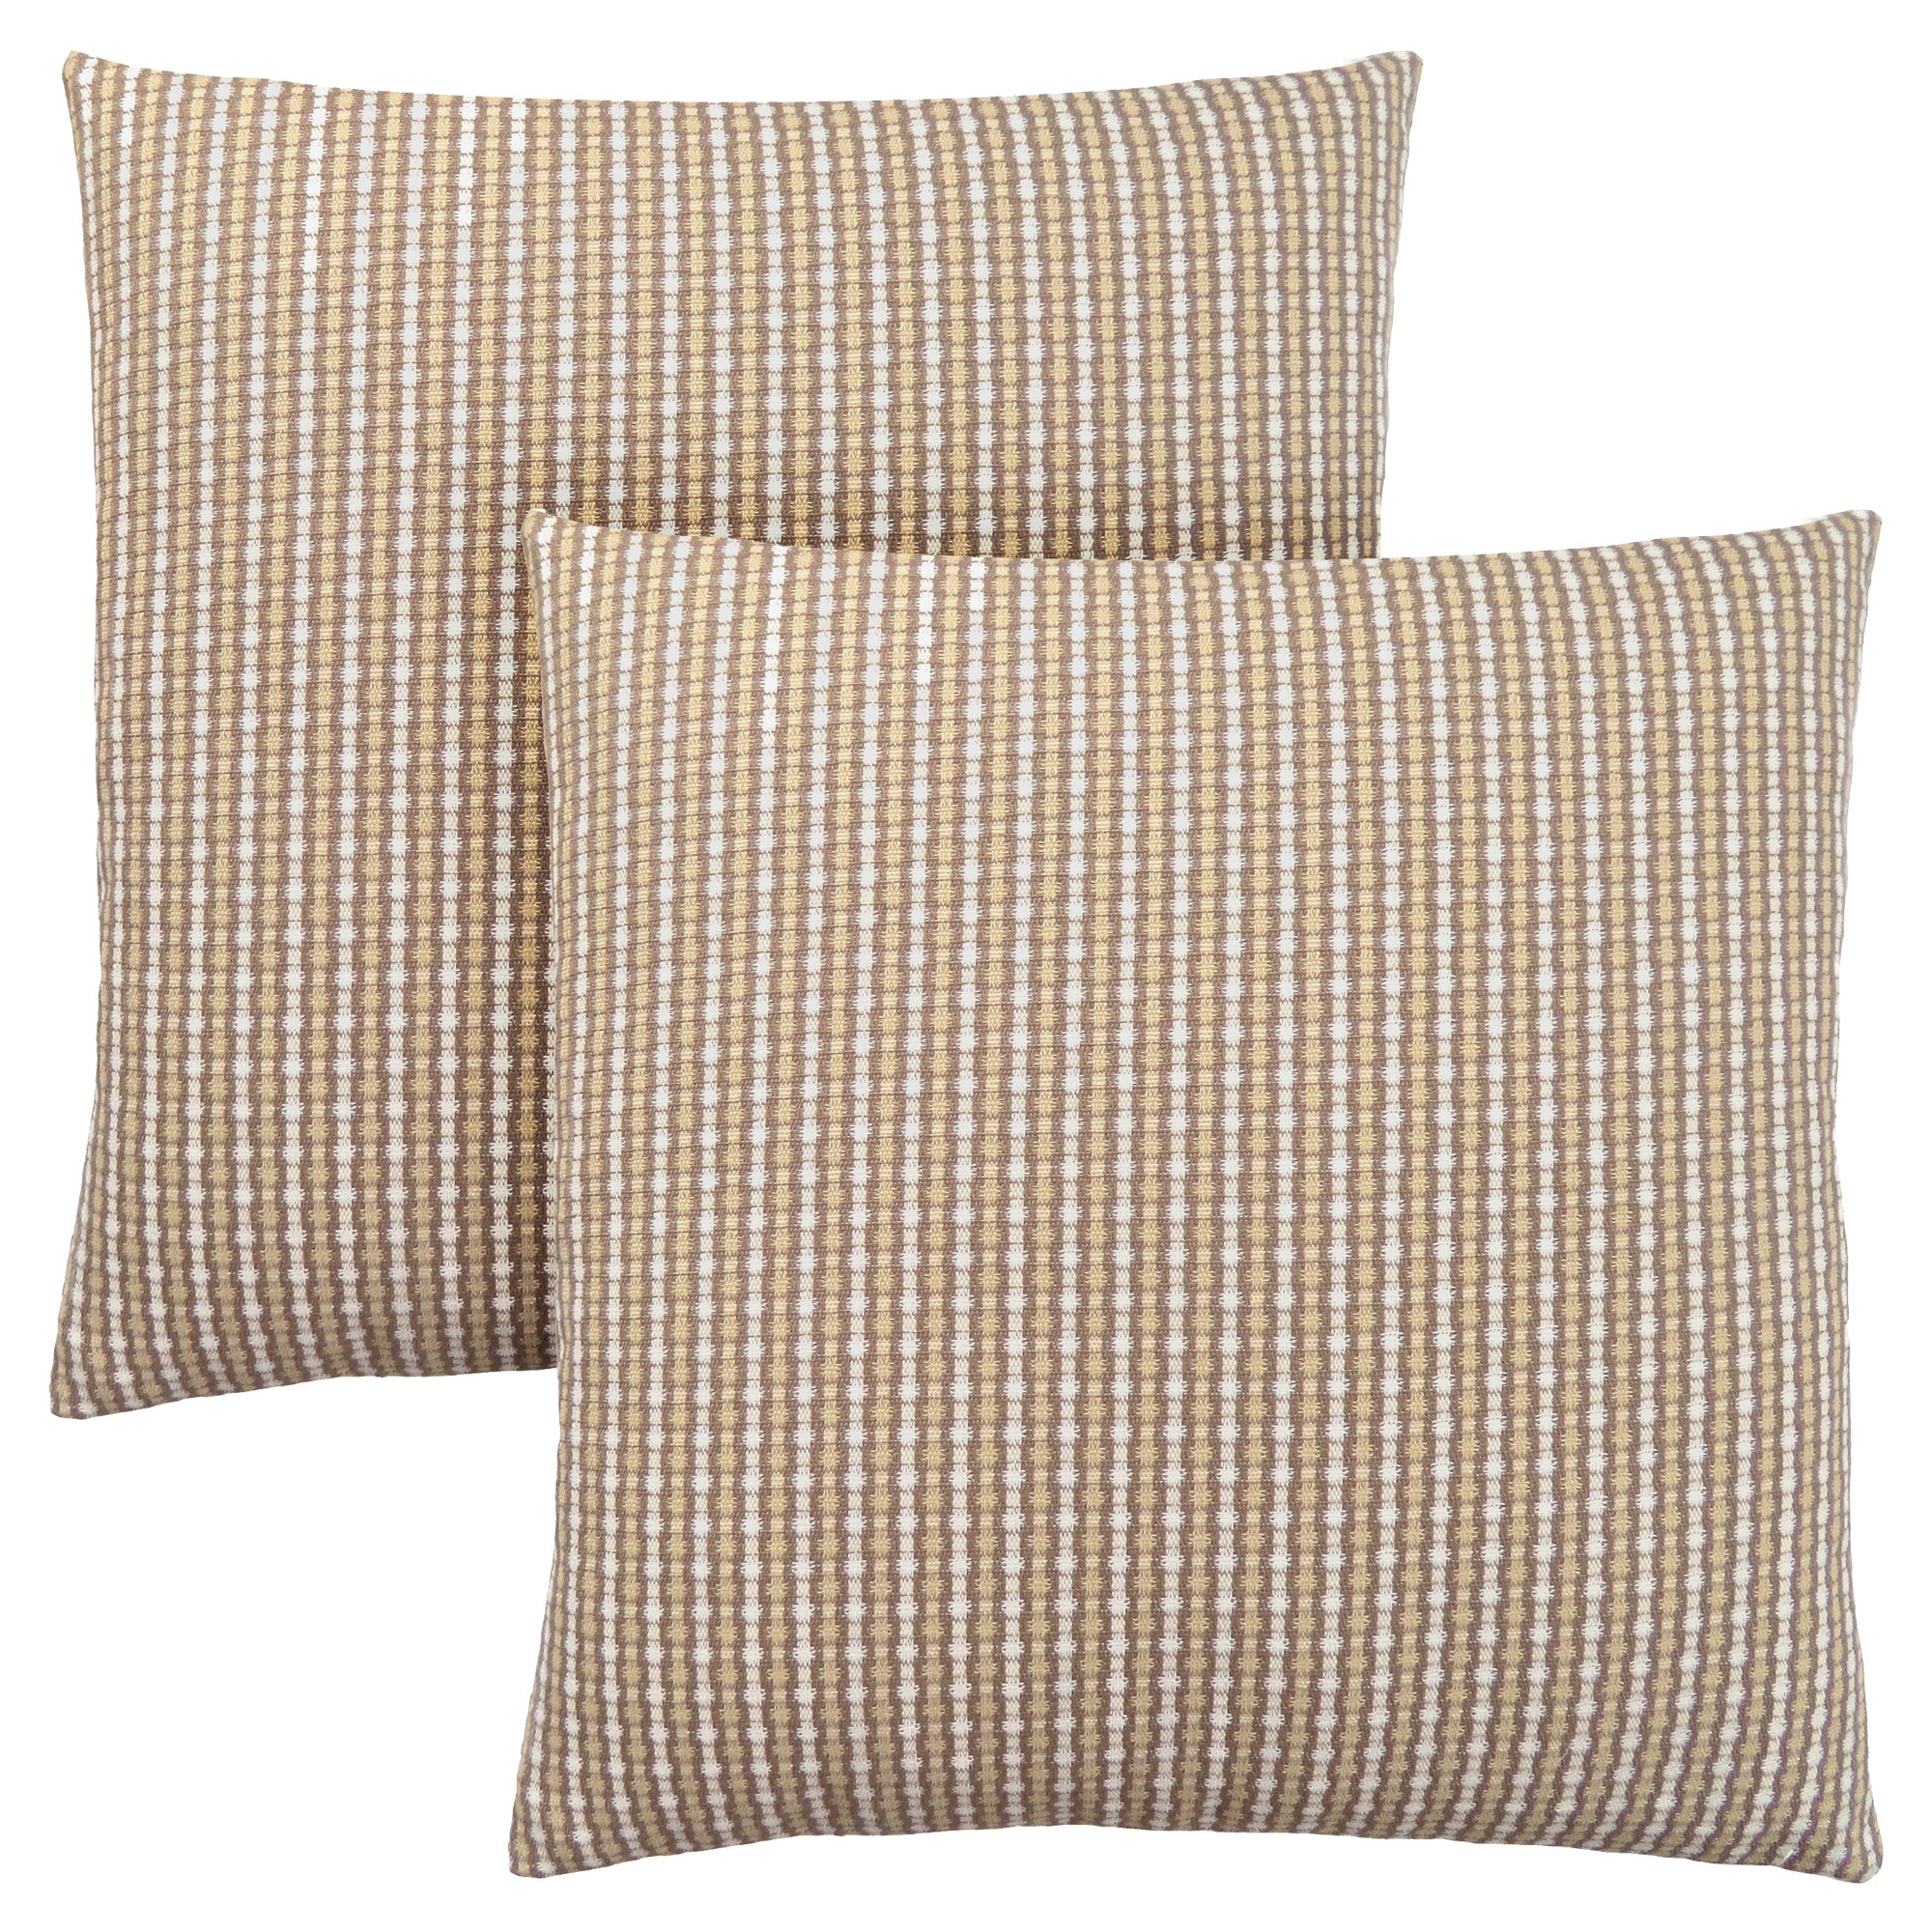 MN-419229    Pillows, Set Of 2, 18 X 18 Square, Insert Included, Decorative Throw, Accent, Sofa, Couch, Bed, Soft Polyester Woven Fabric, Hypoallergenic Soft Polyester Insert, Light And Dark Taupe, Abstract Dot Design, Classic Dot Design, Classic